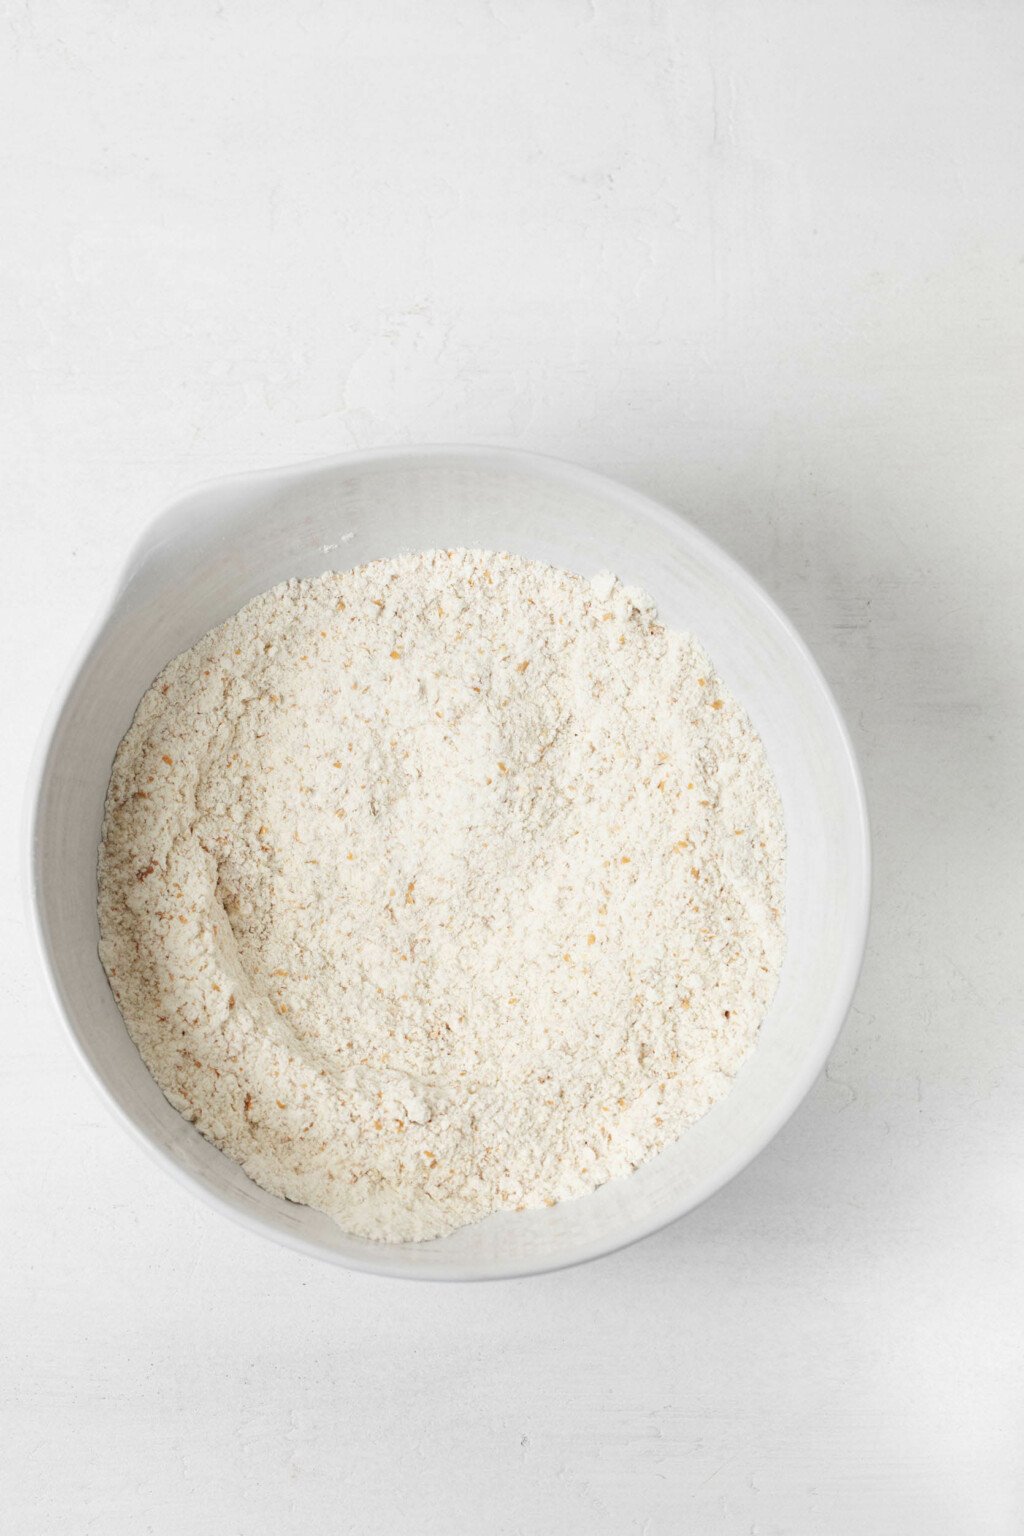 A white mixing bowl is filled with flour. It rests on a white surface.